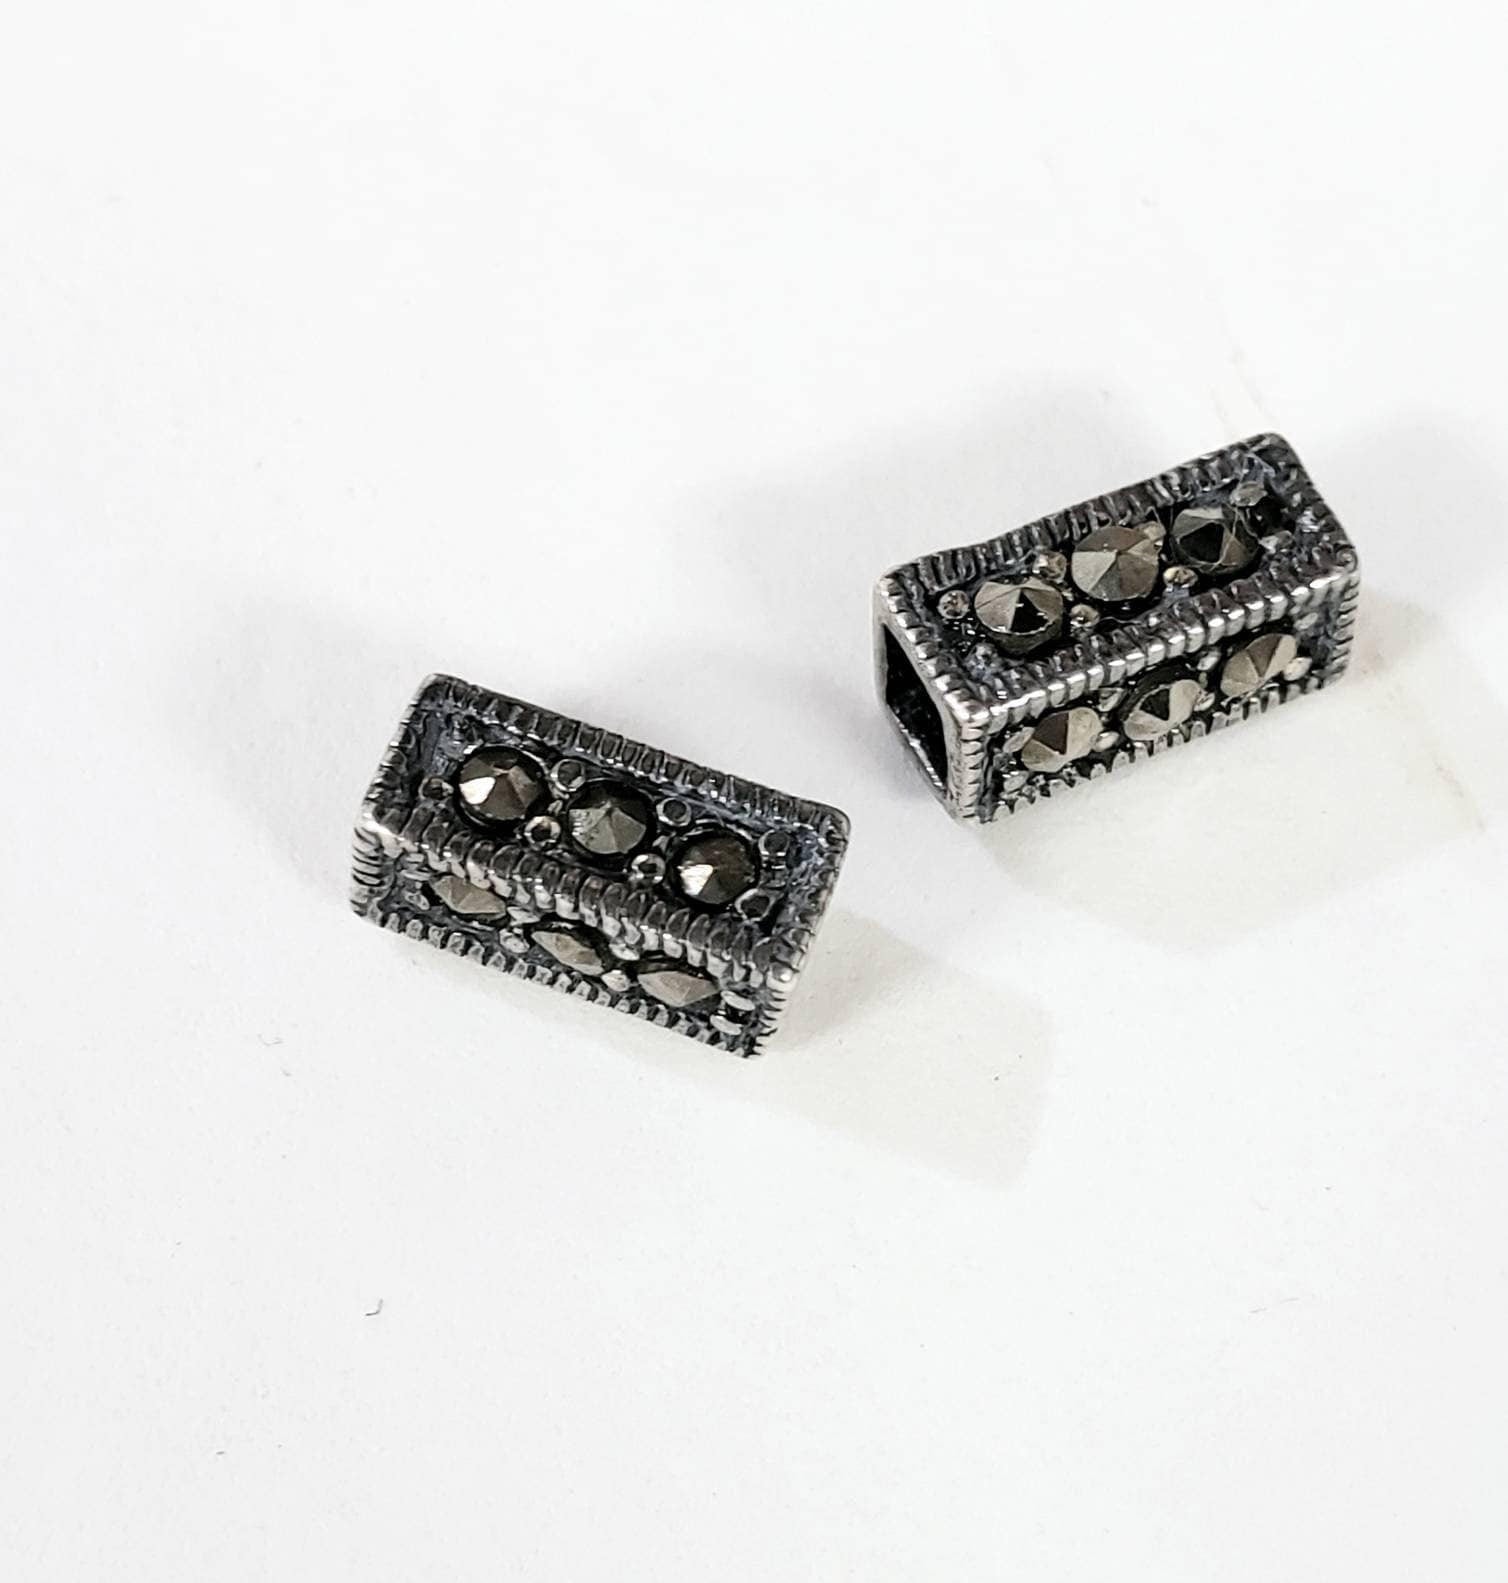 2 pieces Marcasite 925 sterling silver 4.5x9mm square rectangular shape vintage Antique spacer bead , jewelry making spacer bead.